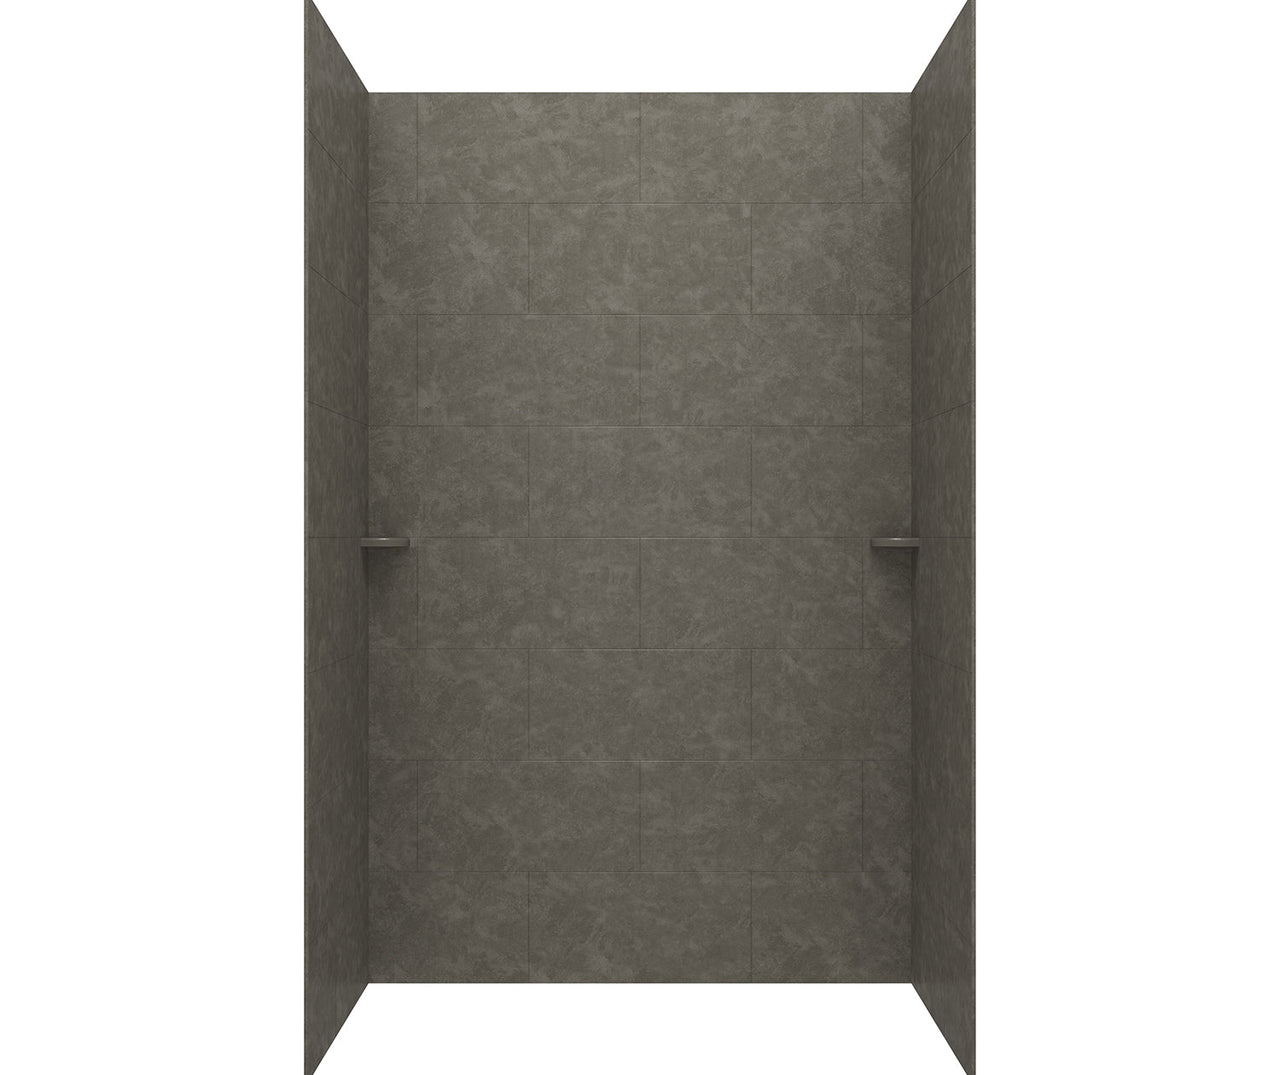 TSMK96-3462 34 x 62 x 96 Swanstone Traditional Subway Tile Glue up Tub Wall Kit in Charcoal Gray